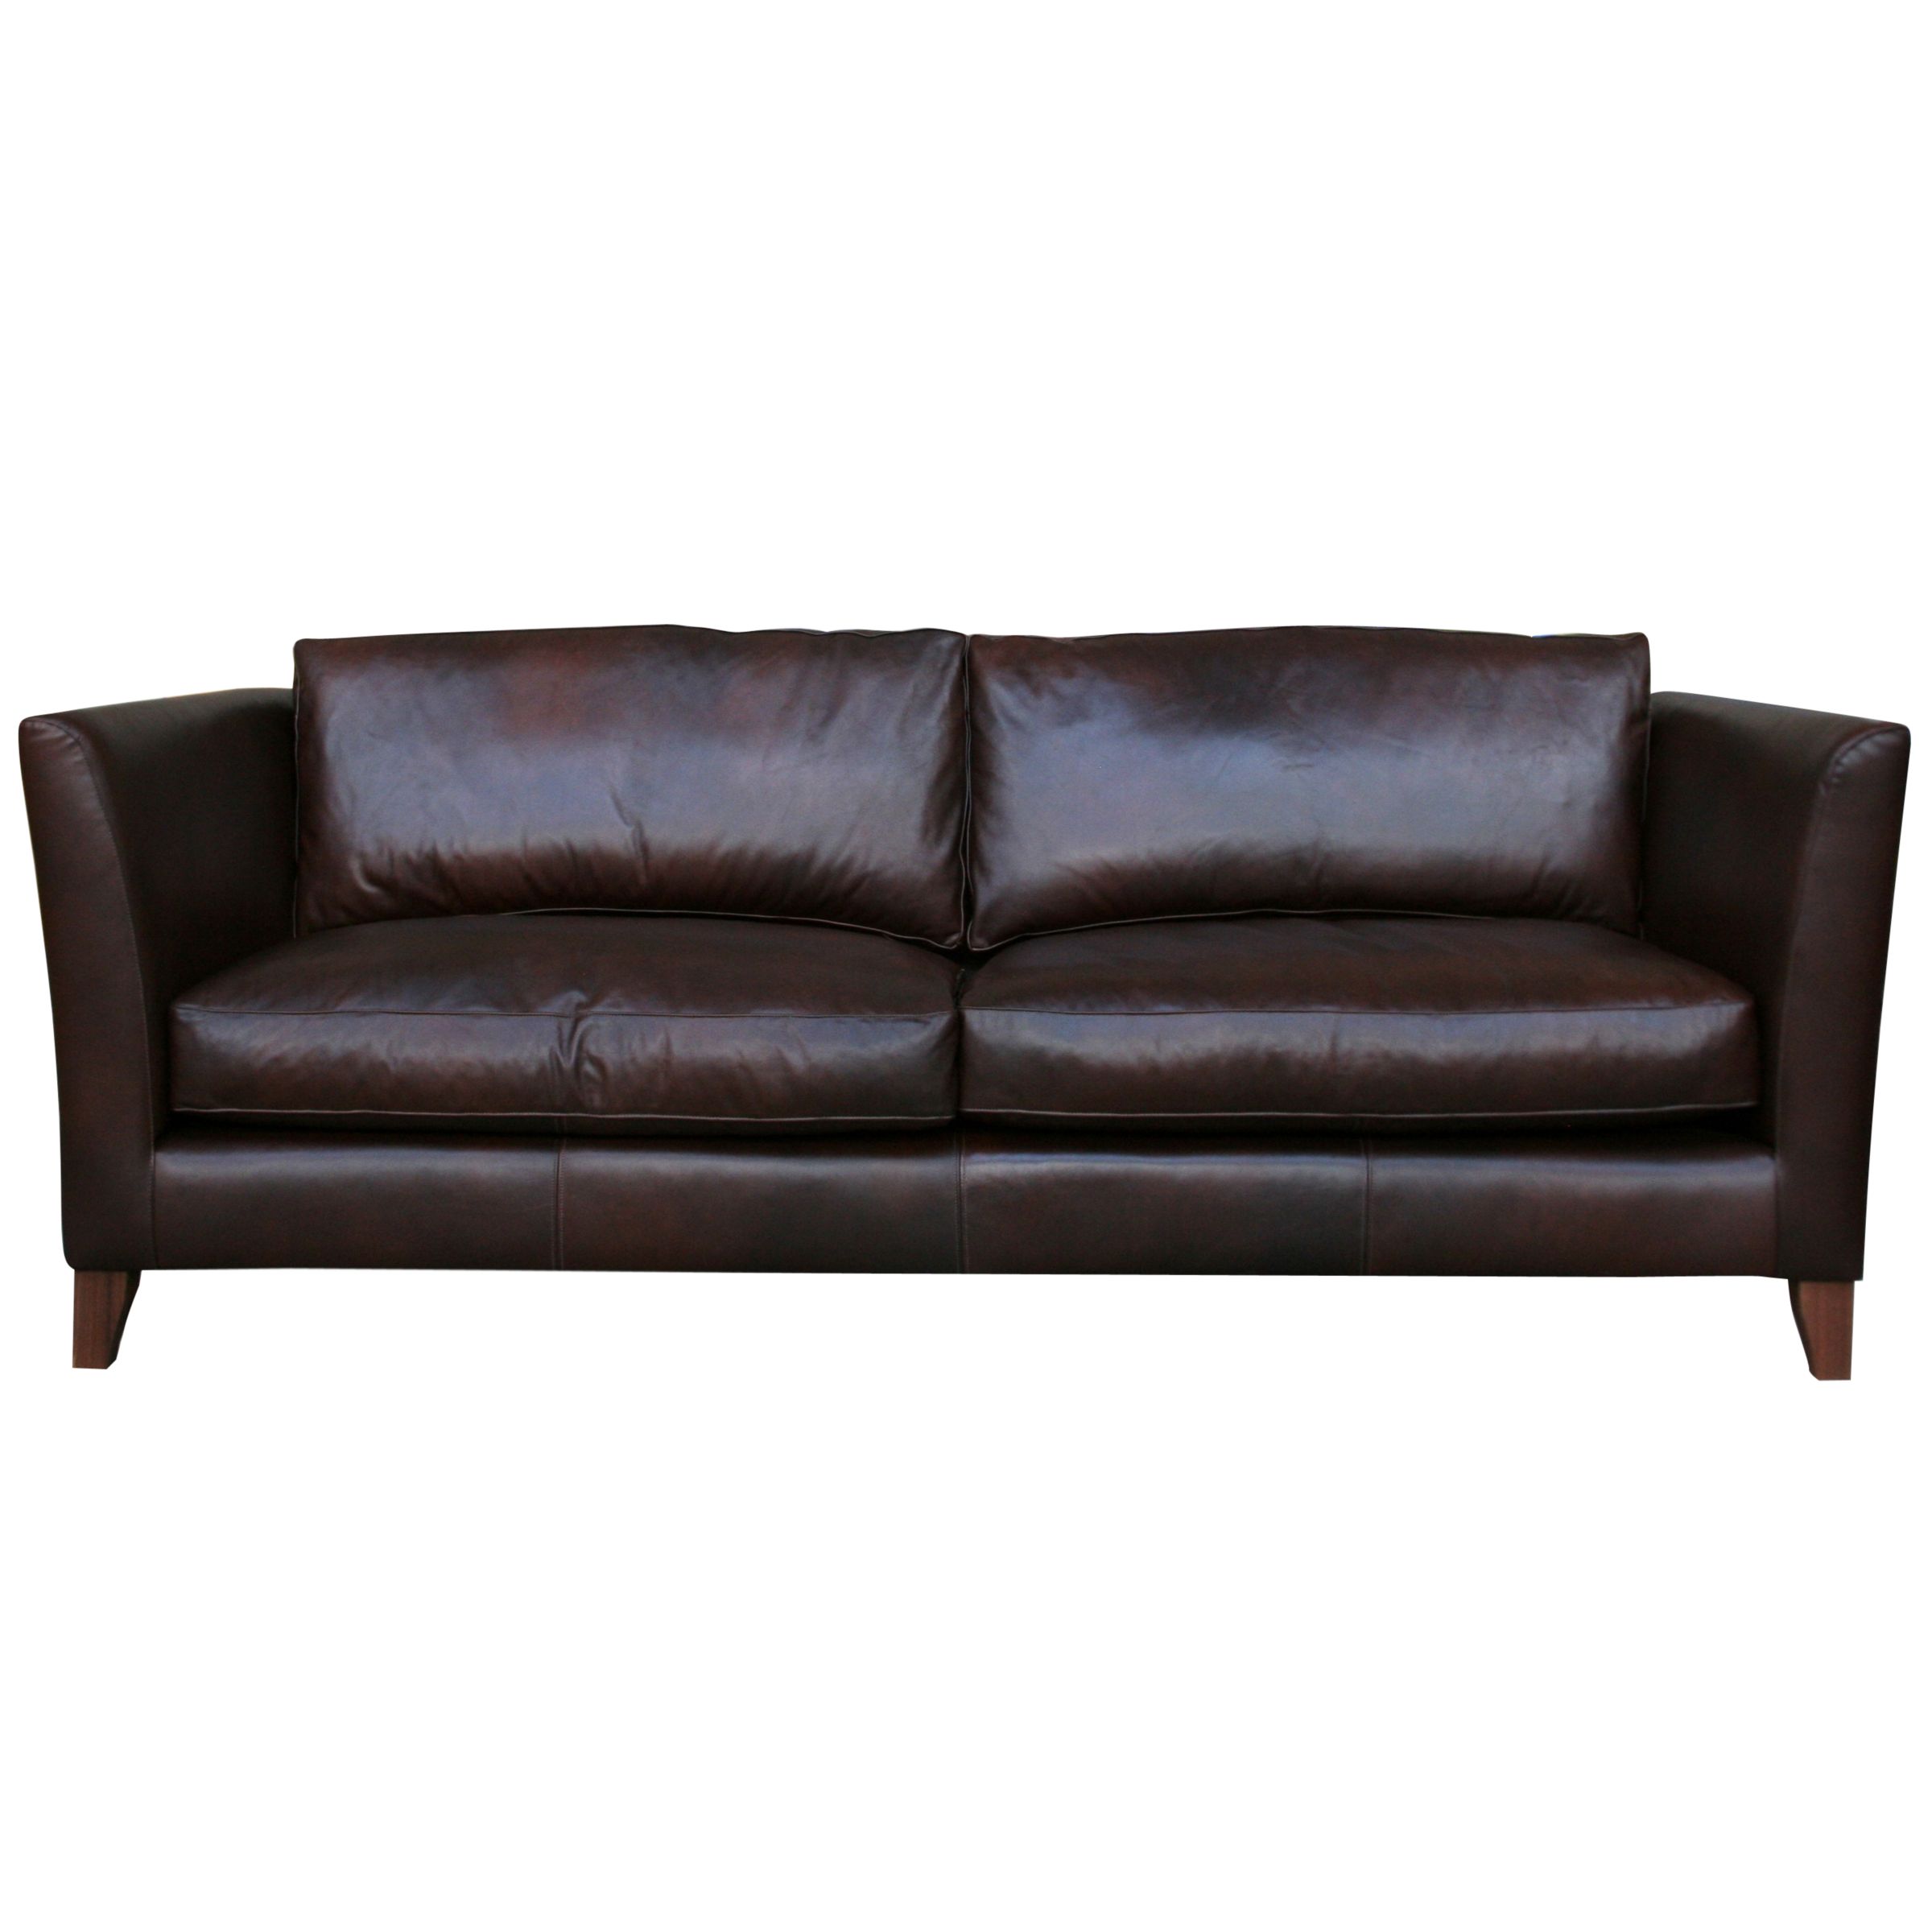 Nick Munro Collection Grand Leather Sofa,